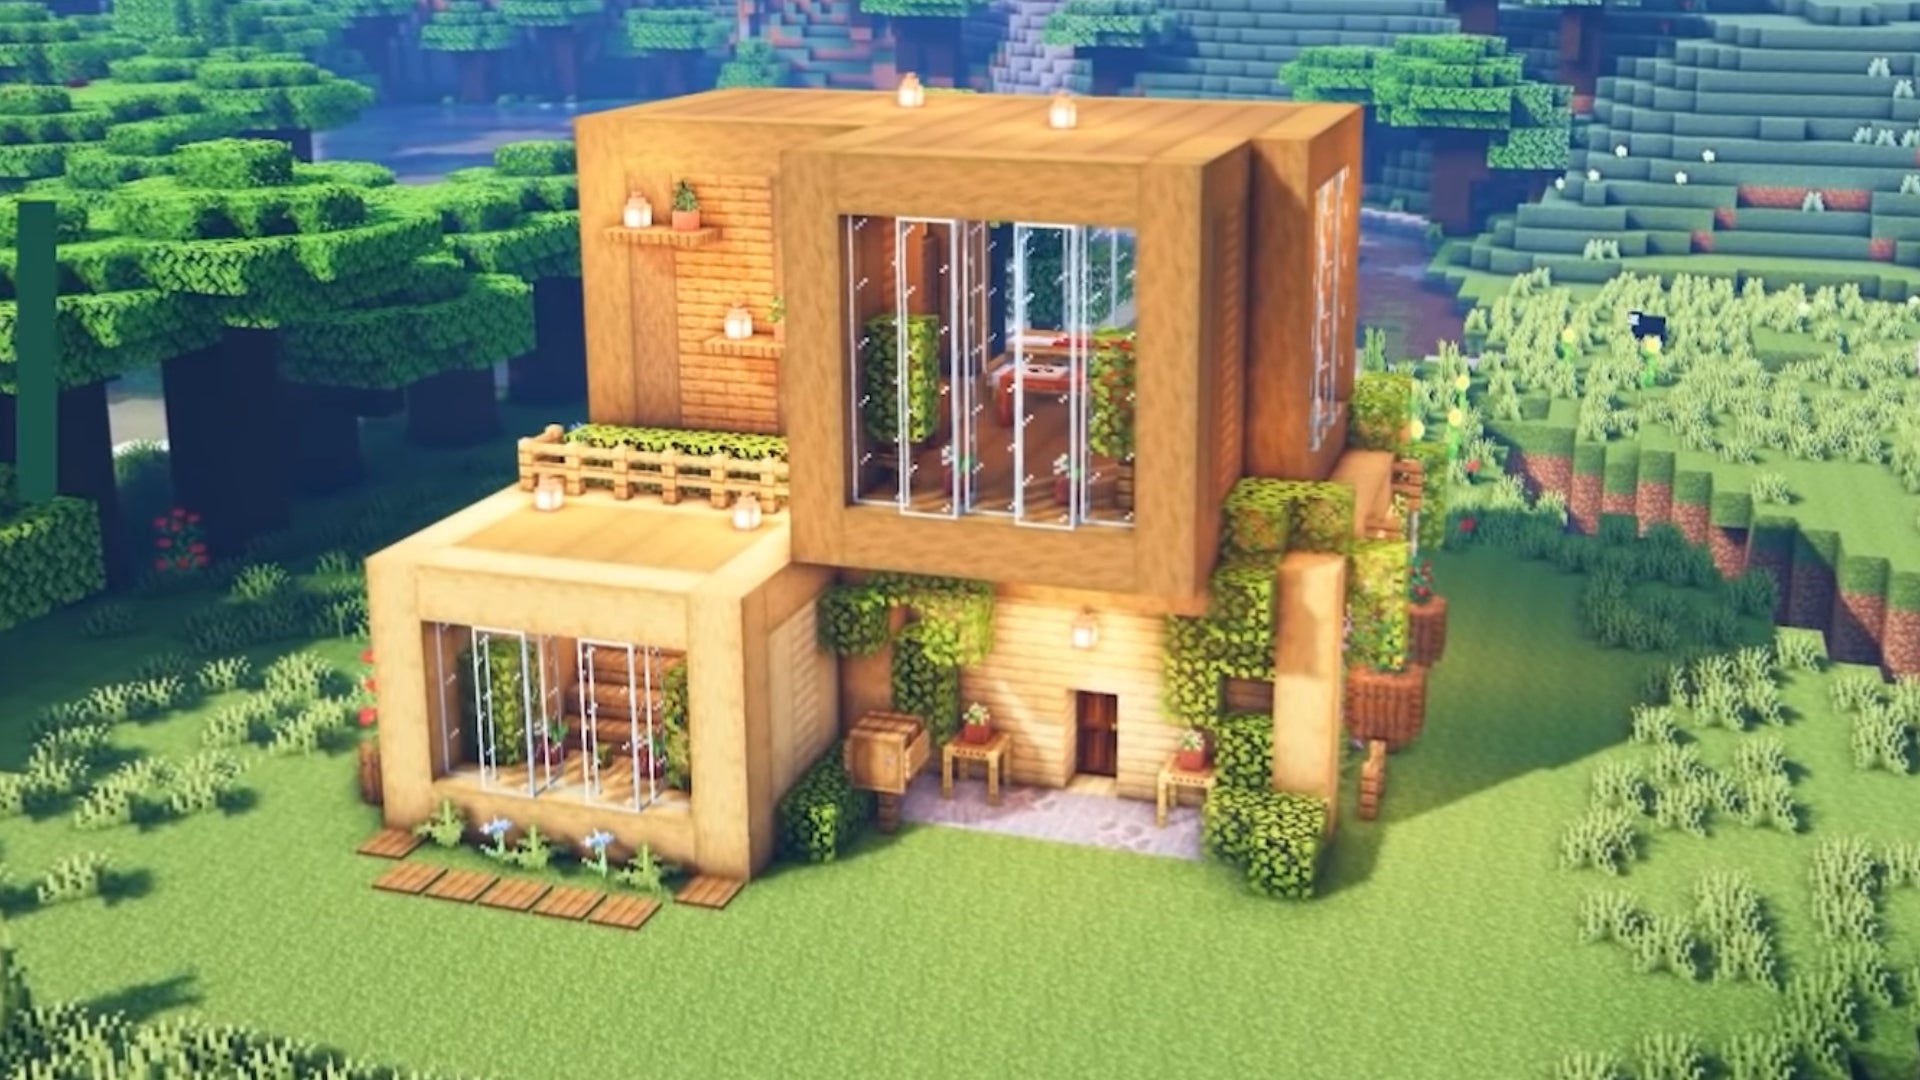 A two-story wooden house in Minecraft, built by YouTuber SheepGG.